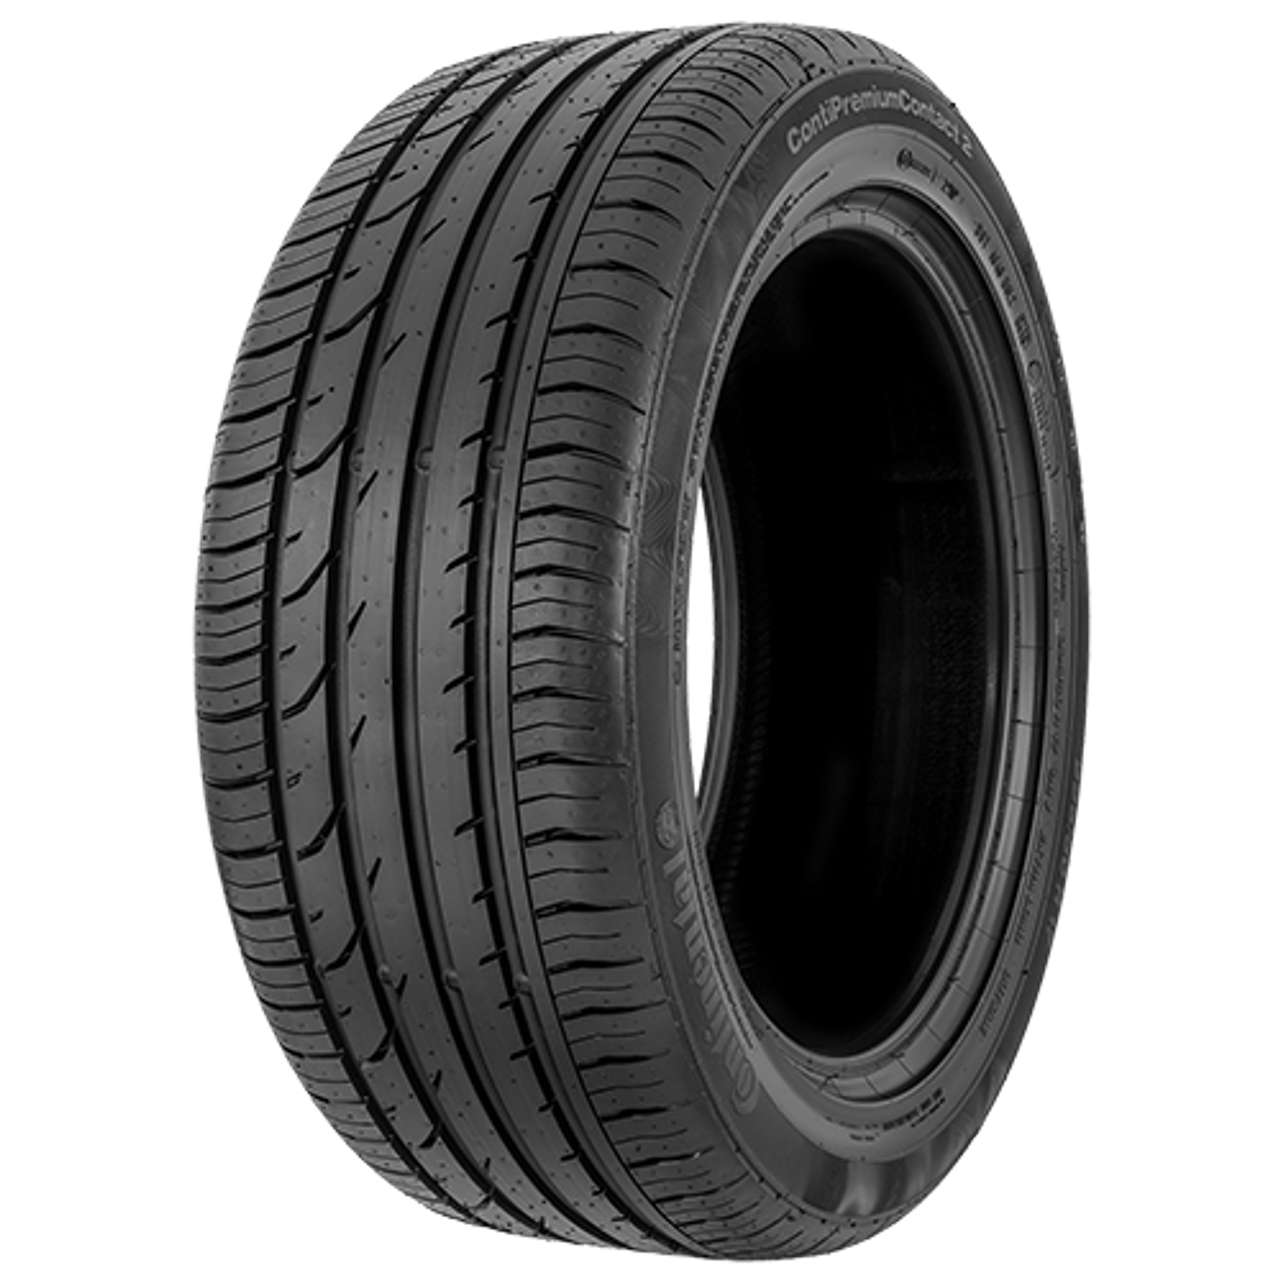 CONTINENTAL CONTIPREMIUMCONTACT 2 (*) 175/65R15 84H 